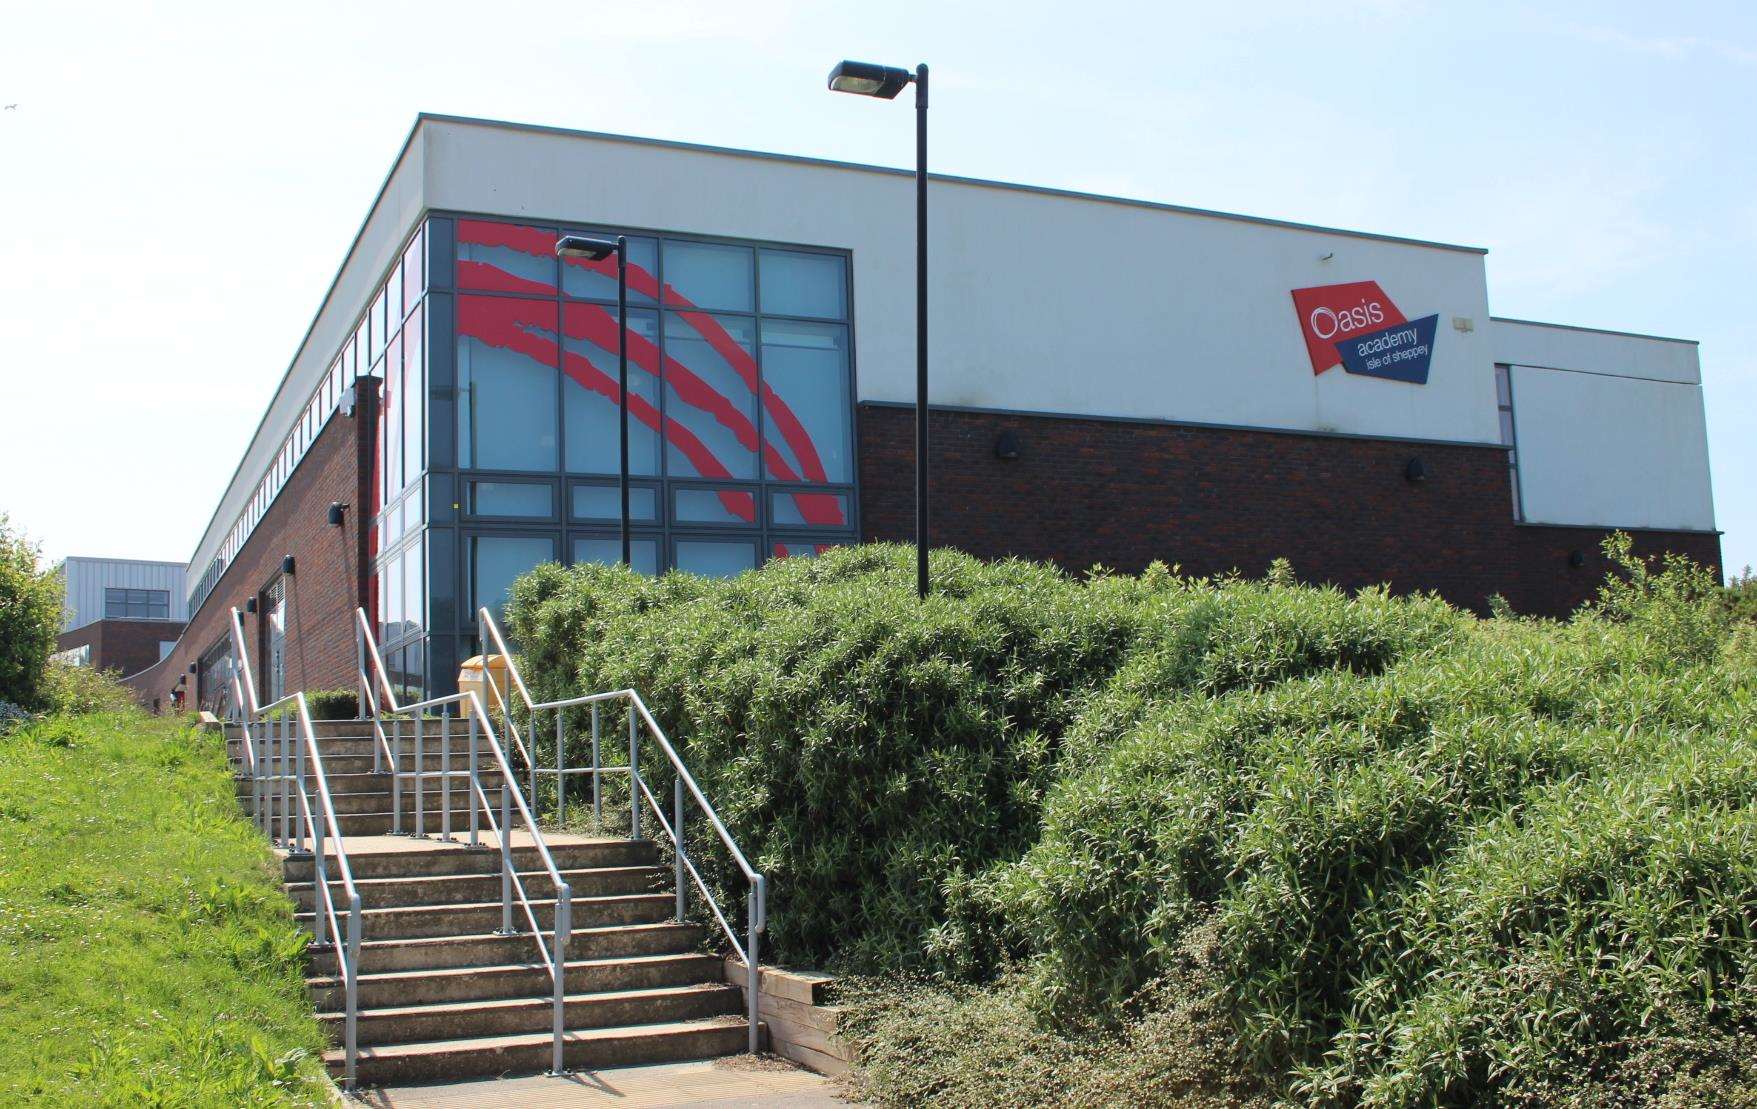 Oasis Academy's Minster campus